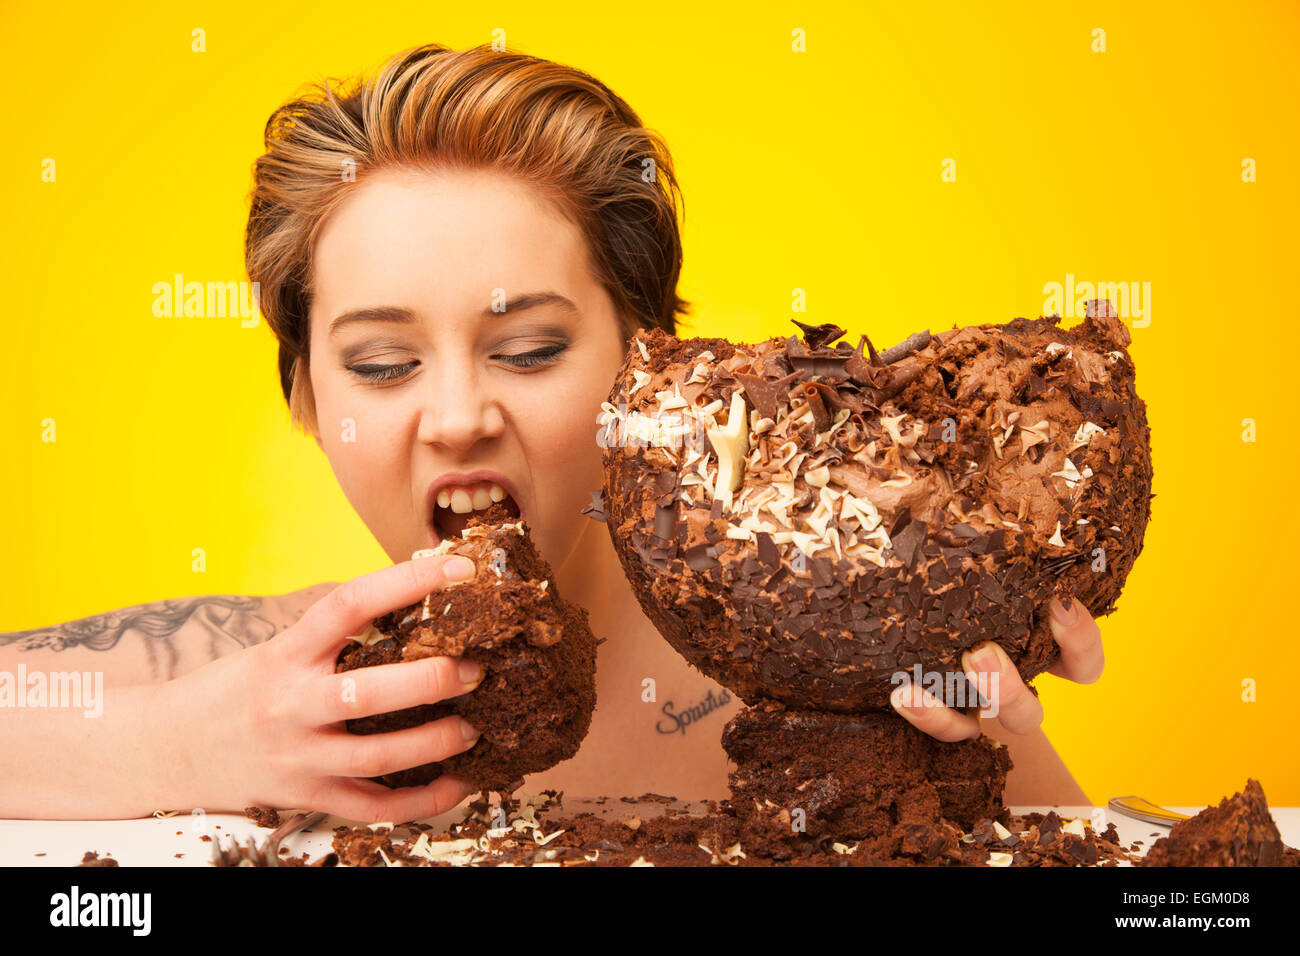 Young woman about to eat a large slice of chocolate cake. Stock Photo